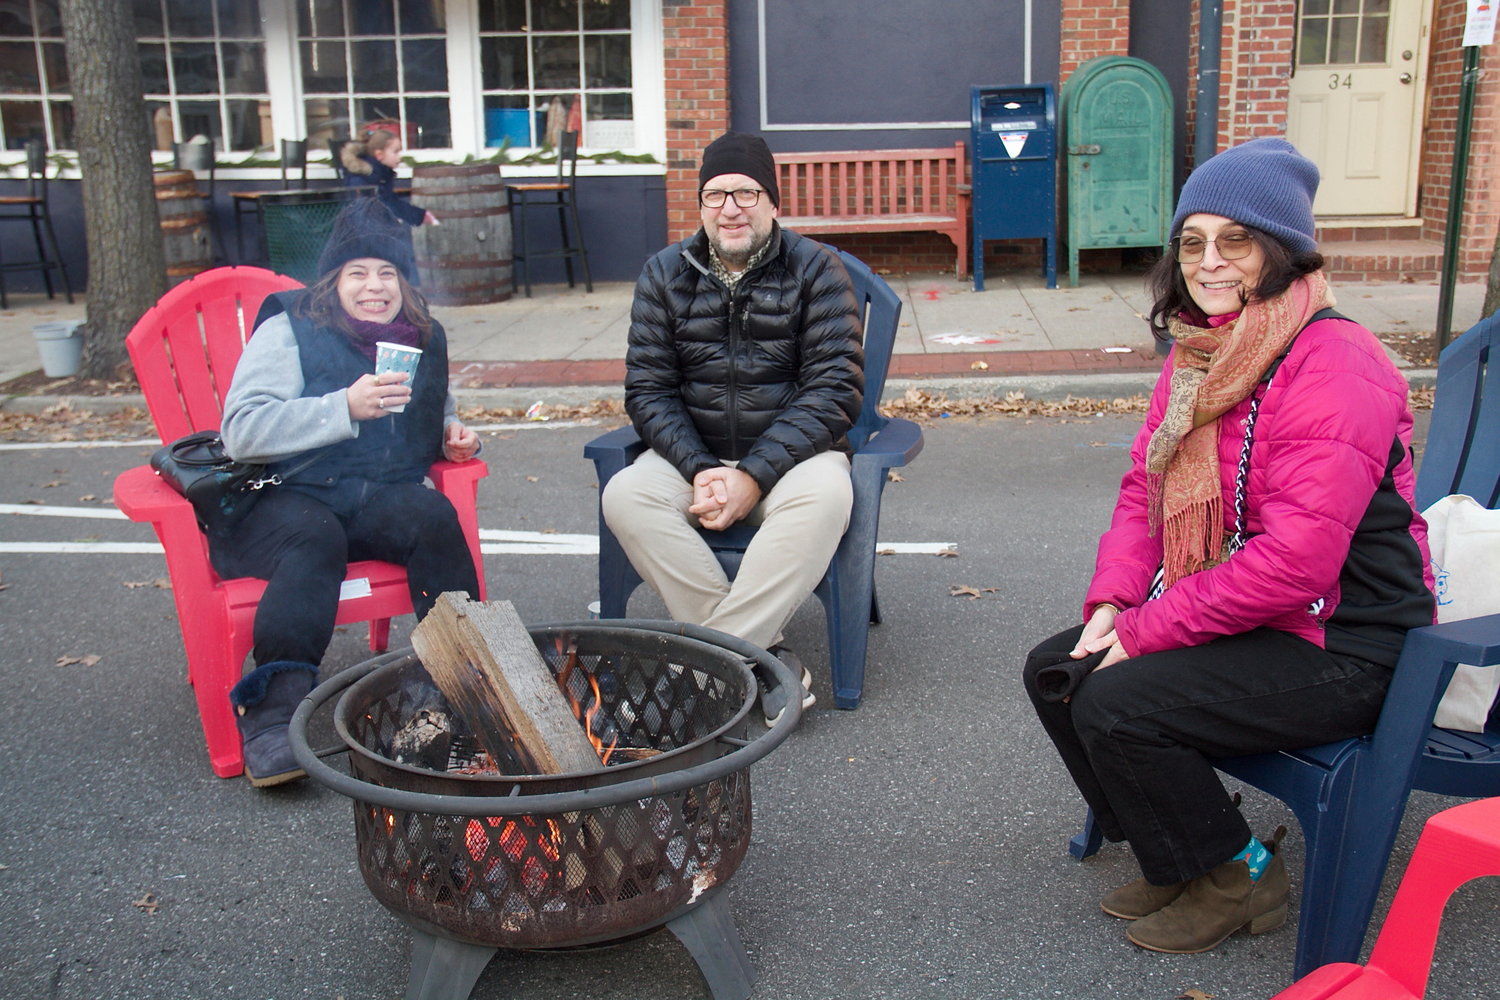 Many people took advantage of the fire pit on Audrey Avenue, including Beth and Dan Chahbazian, left, and Liz Miazza.